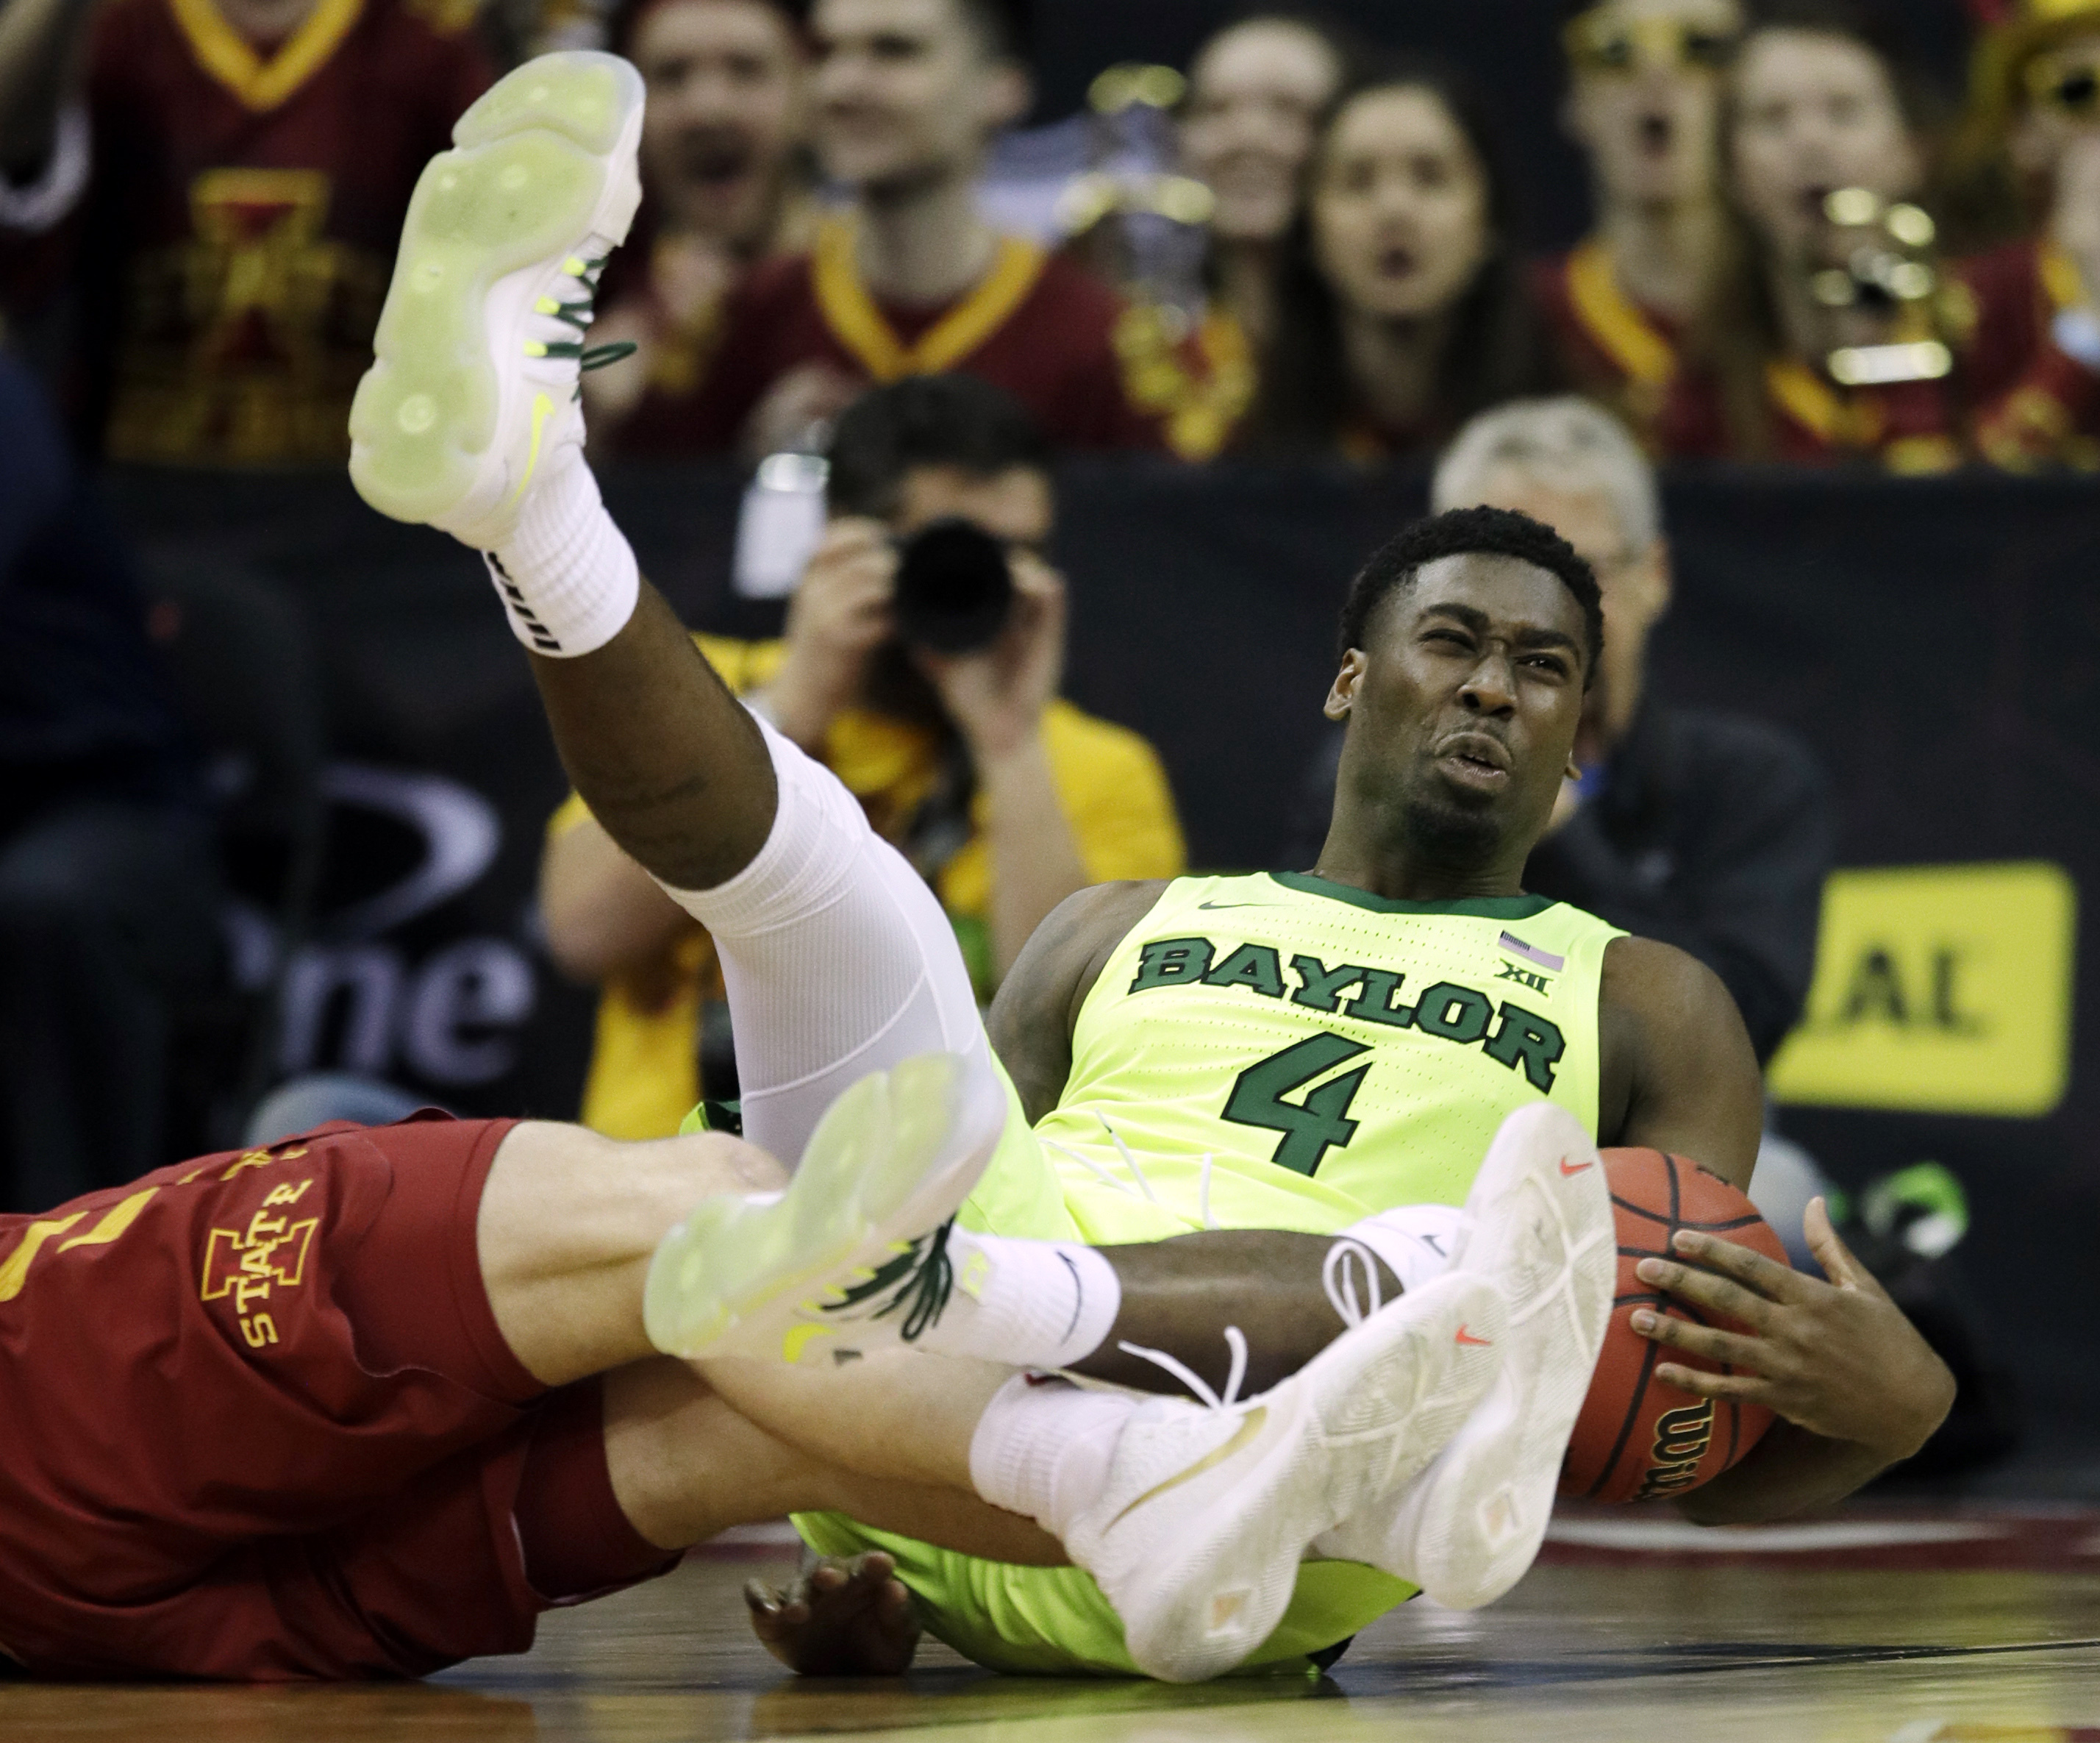 Bears stumble in Big 12 quarterfinals for third straight year | The Baylor Lariat